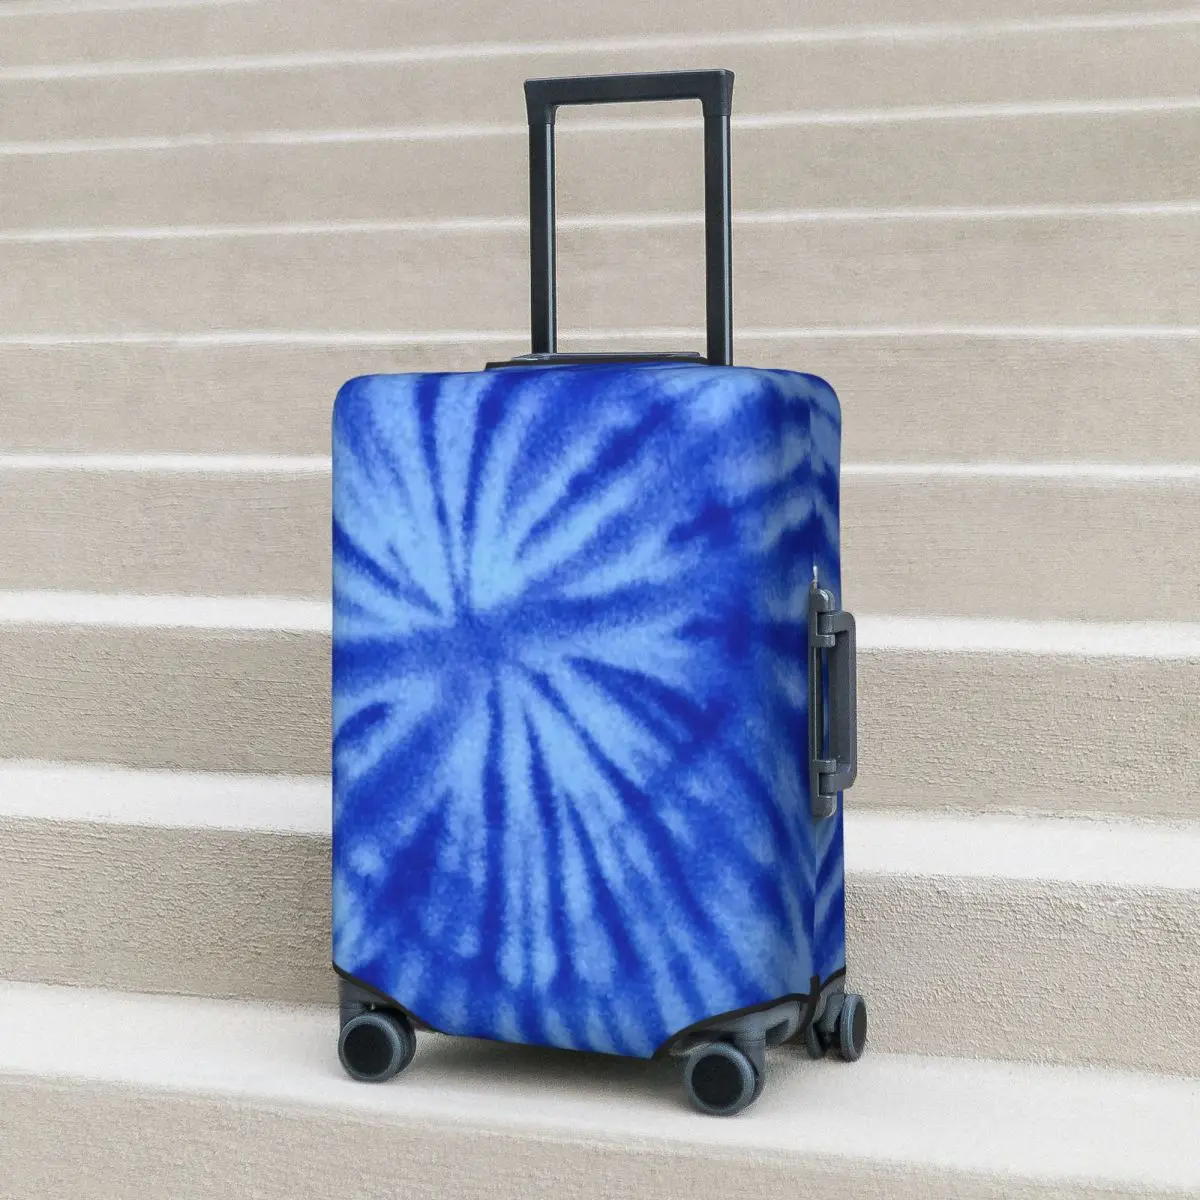 

Tie Dye Suitcase Cover Blue Spiral Swirl Business Protection Vacation Fun Luggage Accesories